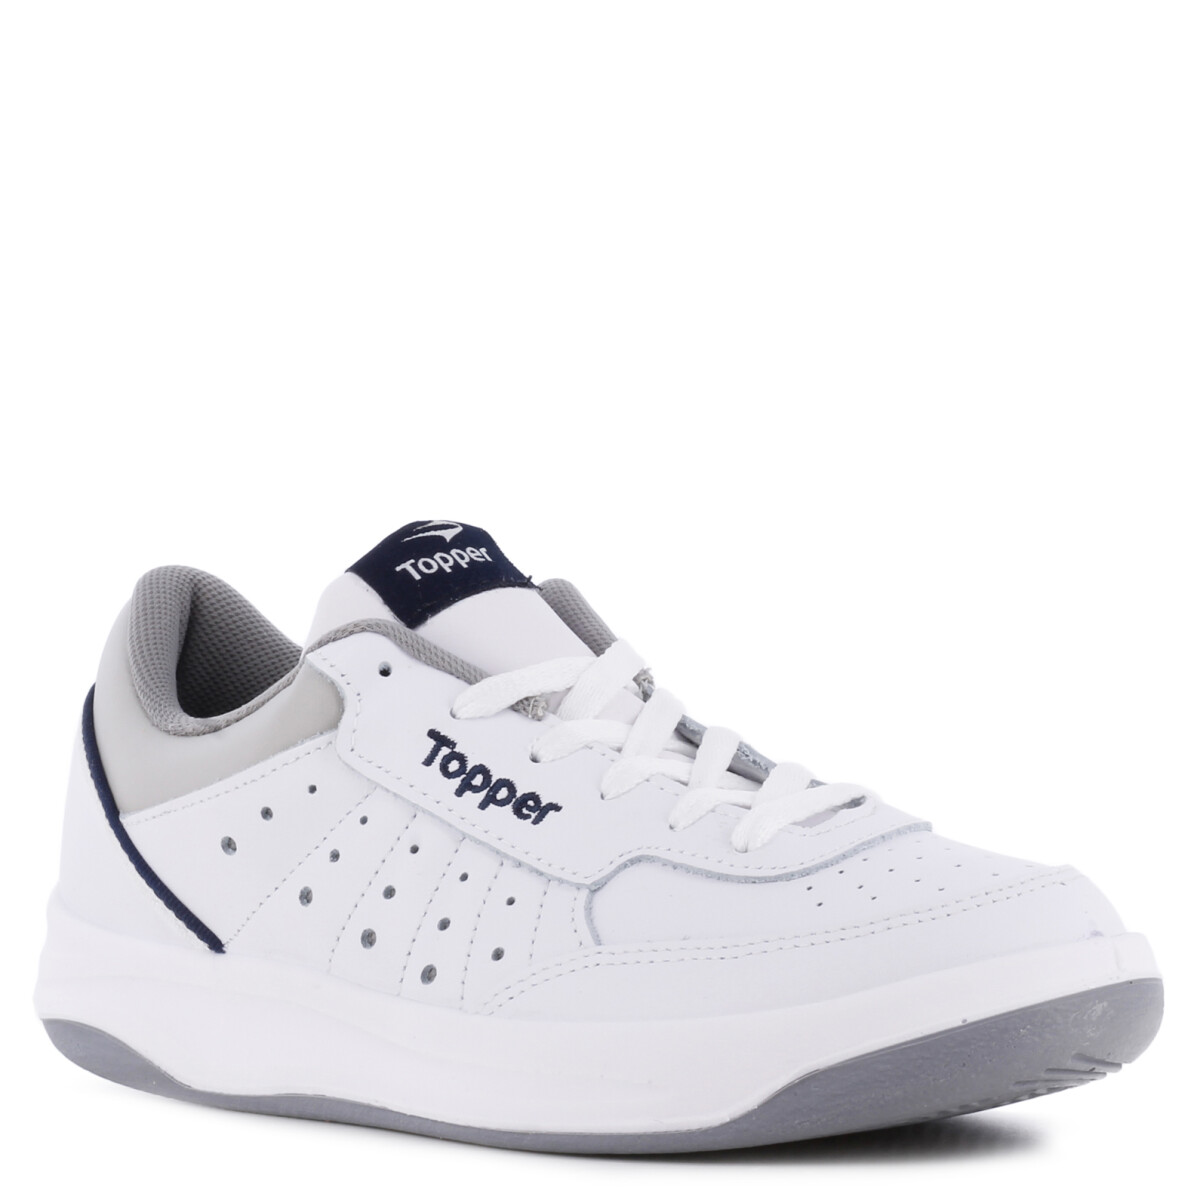 X Forcer Topper - Blanco/Gris/Azul 